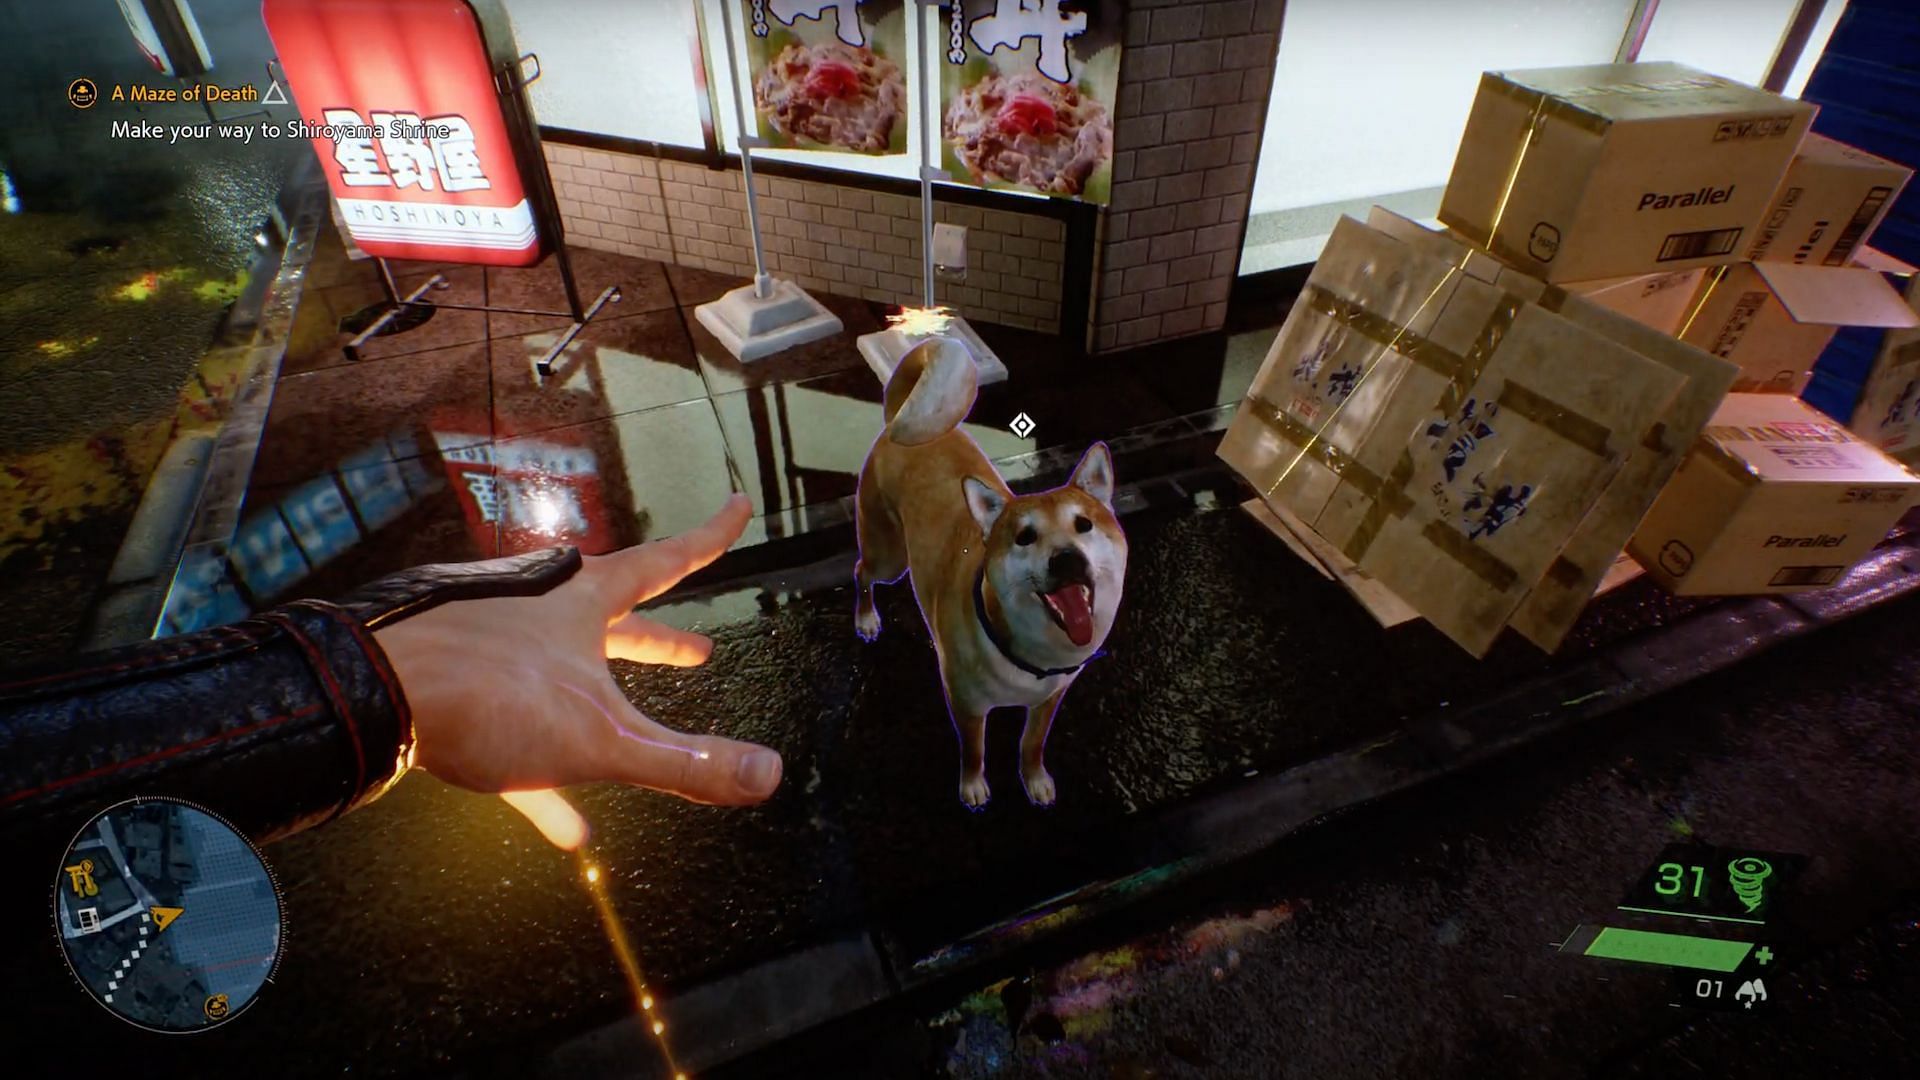 Players of Ghostwire: Tokyo are able to feed the dogs they find in order to find secrets (Image via BioH Studios/YouTube)